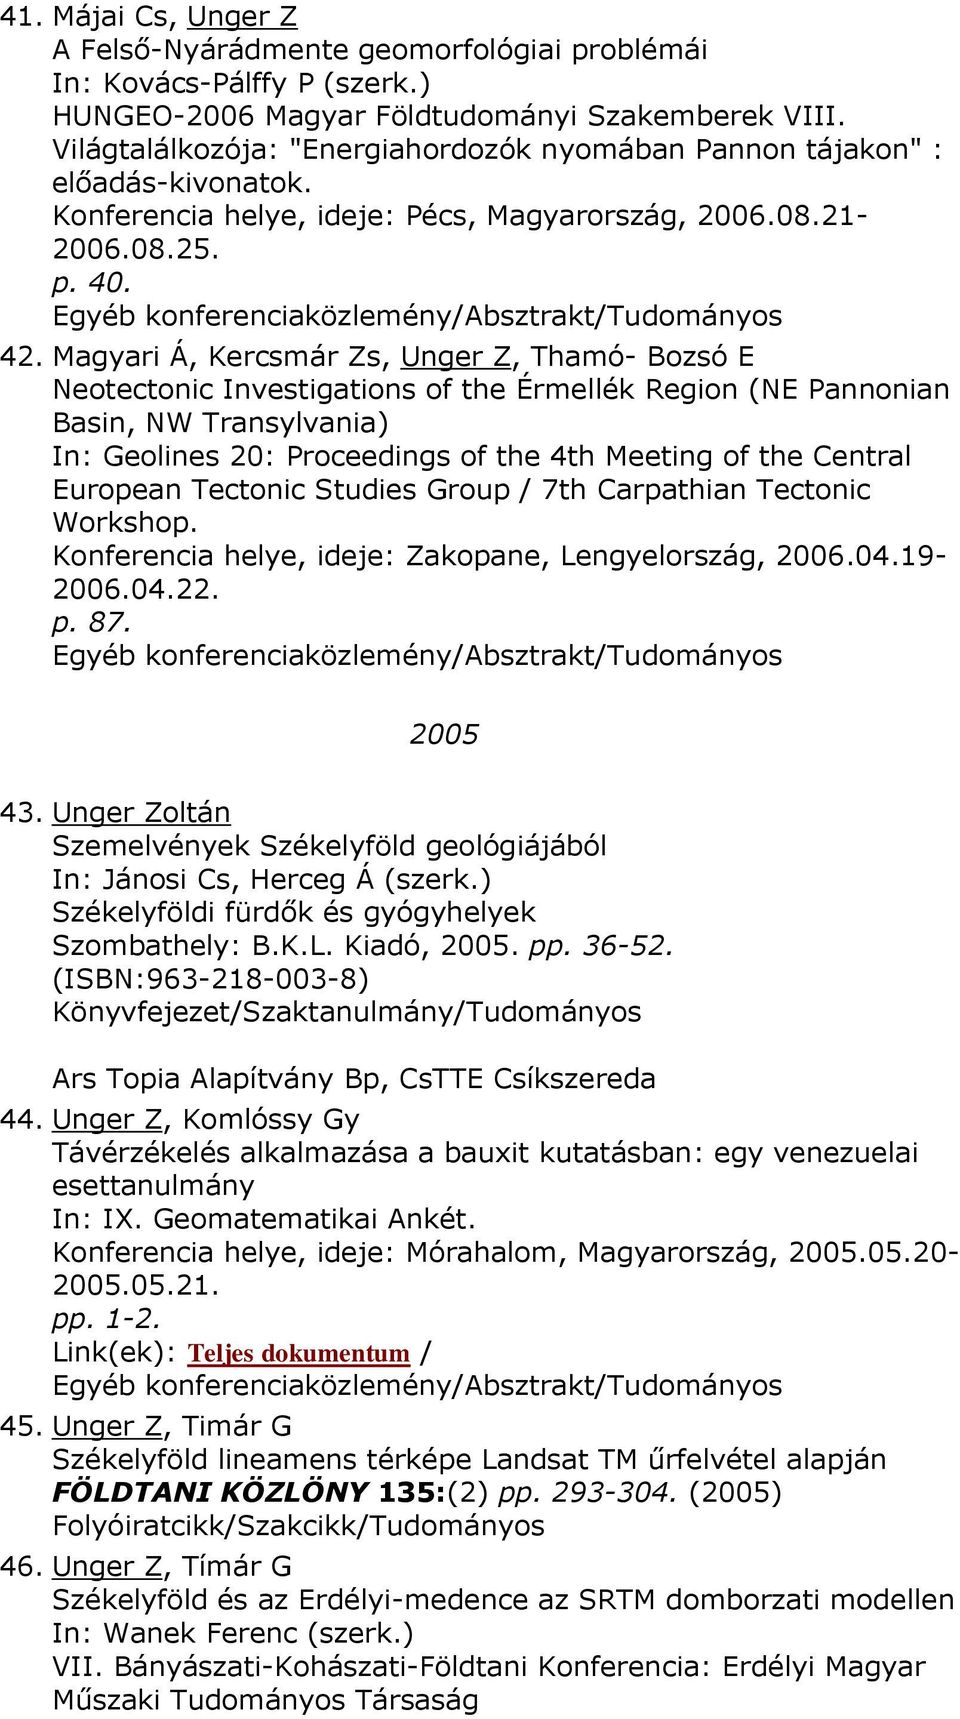 Magyari Á, Kercsmár Zs, Unger Z, Thamó- Bozsó E Neotectonic Investigations of the Érmellék Region (NE Pannonian Basin, NW Transylvania) In: Geolines 20: Proceedings of the 4th Meeting of the Central